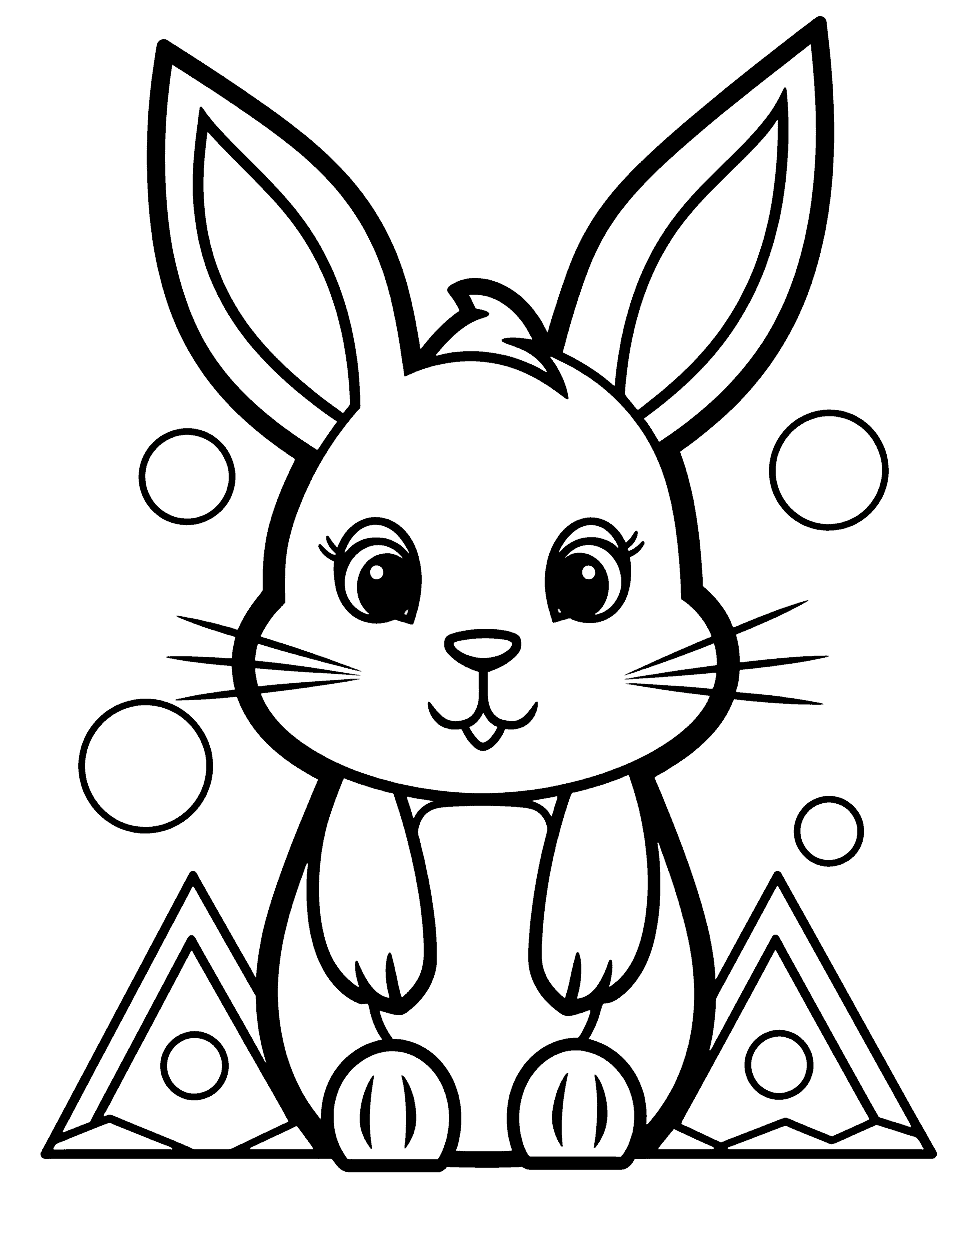 Preschool Bunny with Shapes Coloring Page - A bunny made up entirely of basic shapes like circles, squares, and triangles.